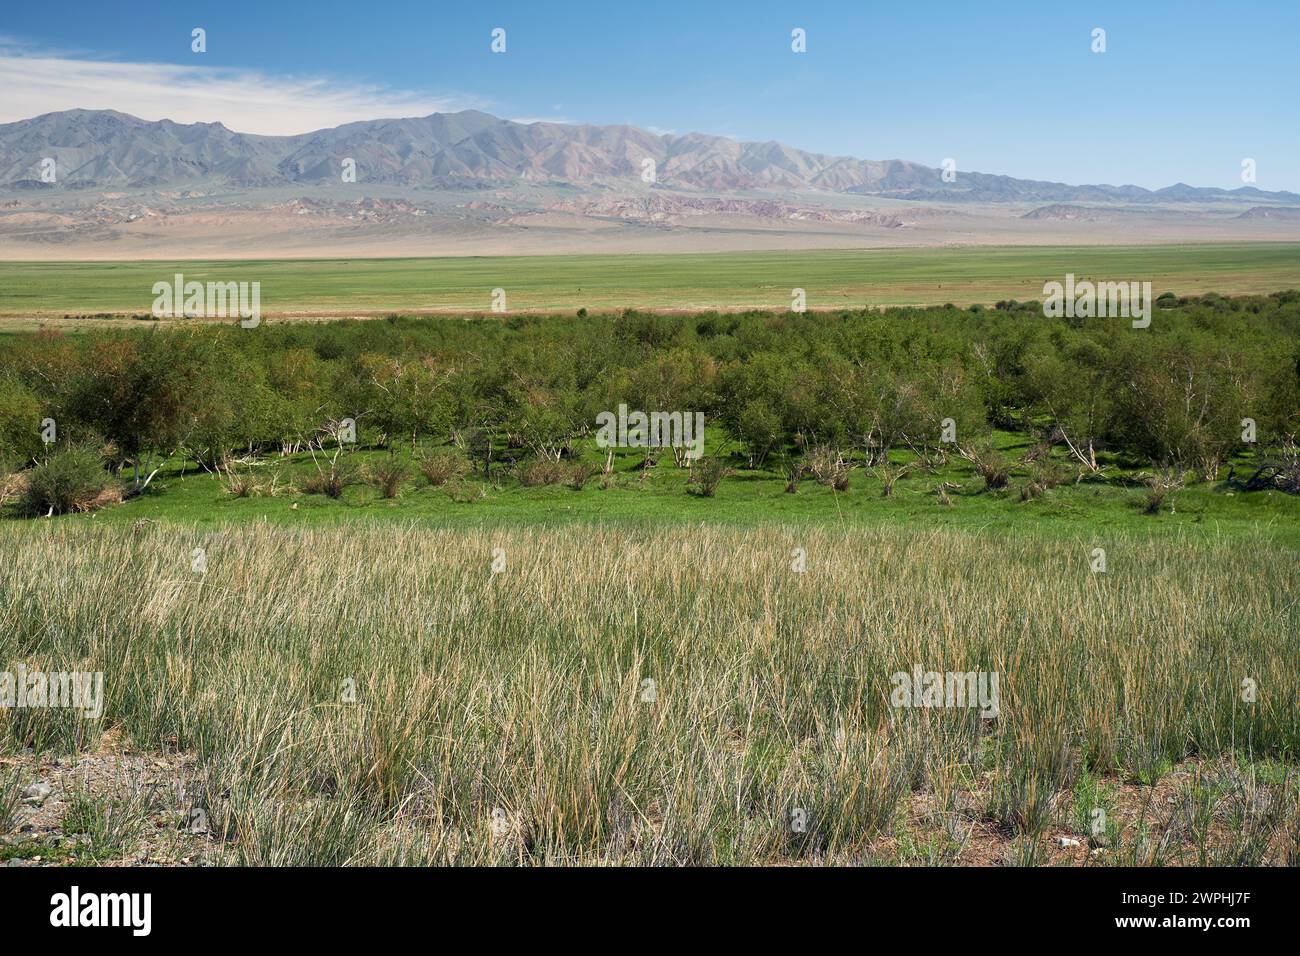 Floodplain birch forest in Khovd aimak in Mongolia. Bushes of grass Achnatherum on foreground and Bumbat Khairkhan Ridge on background. Stock Photo